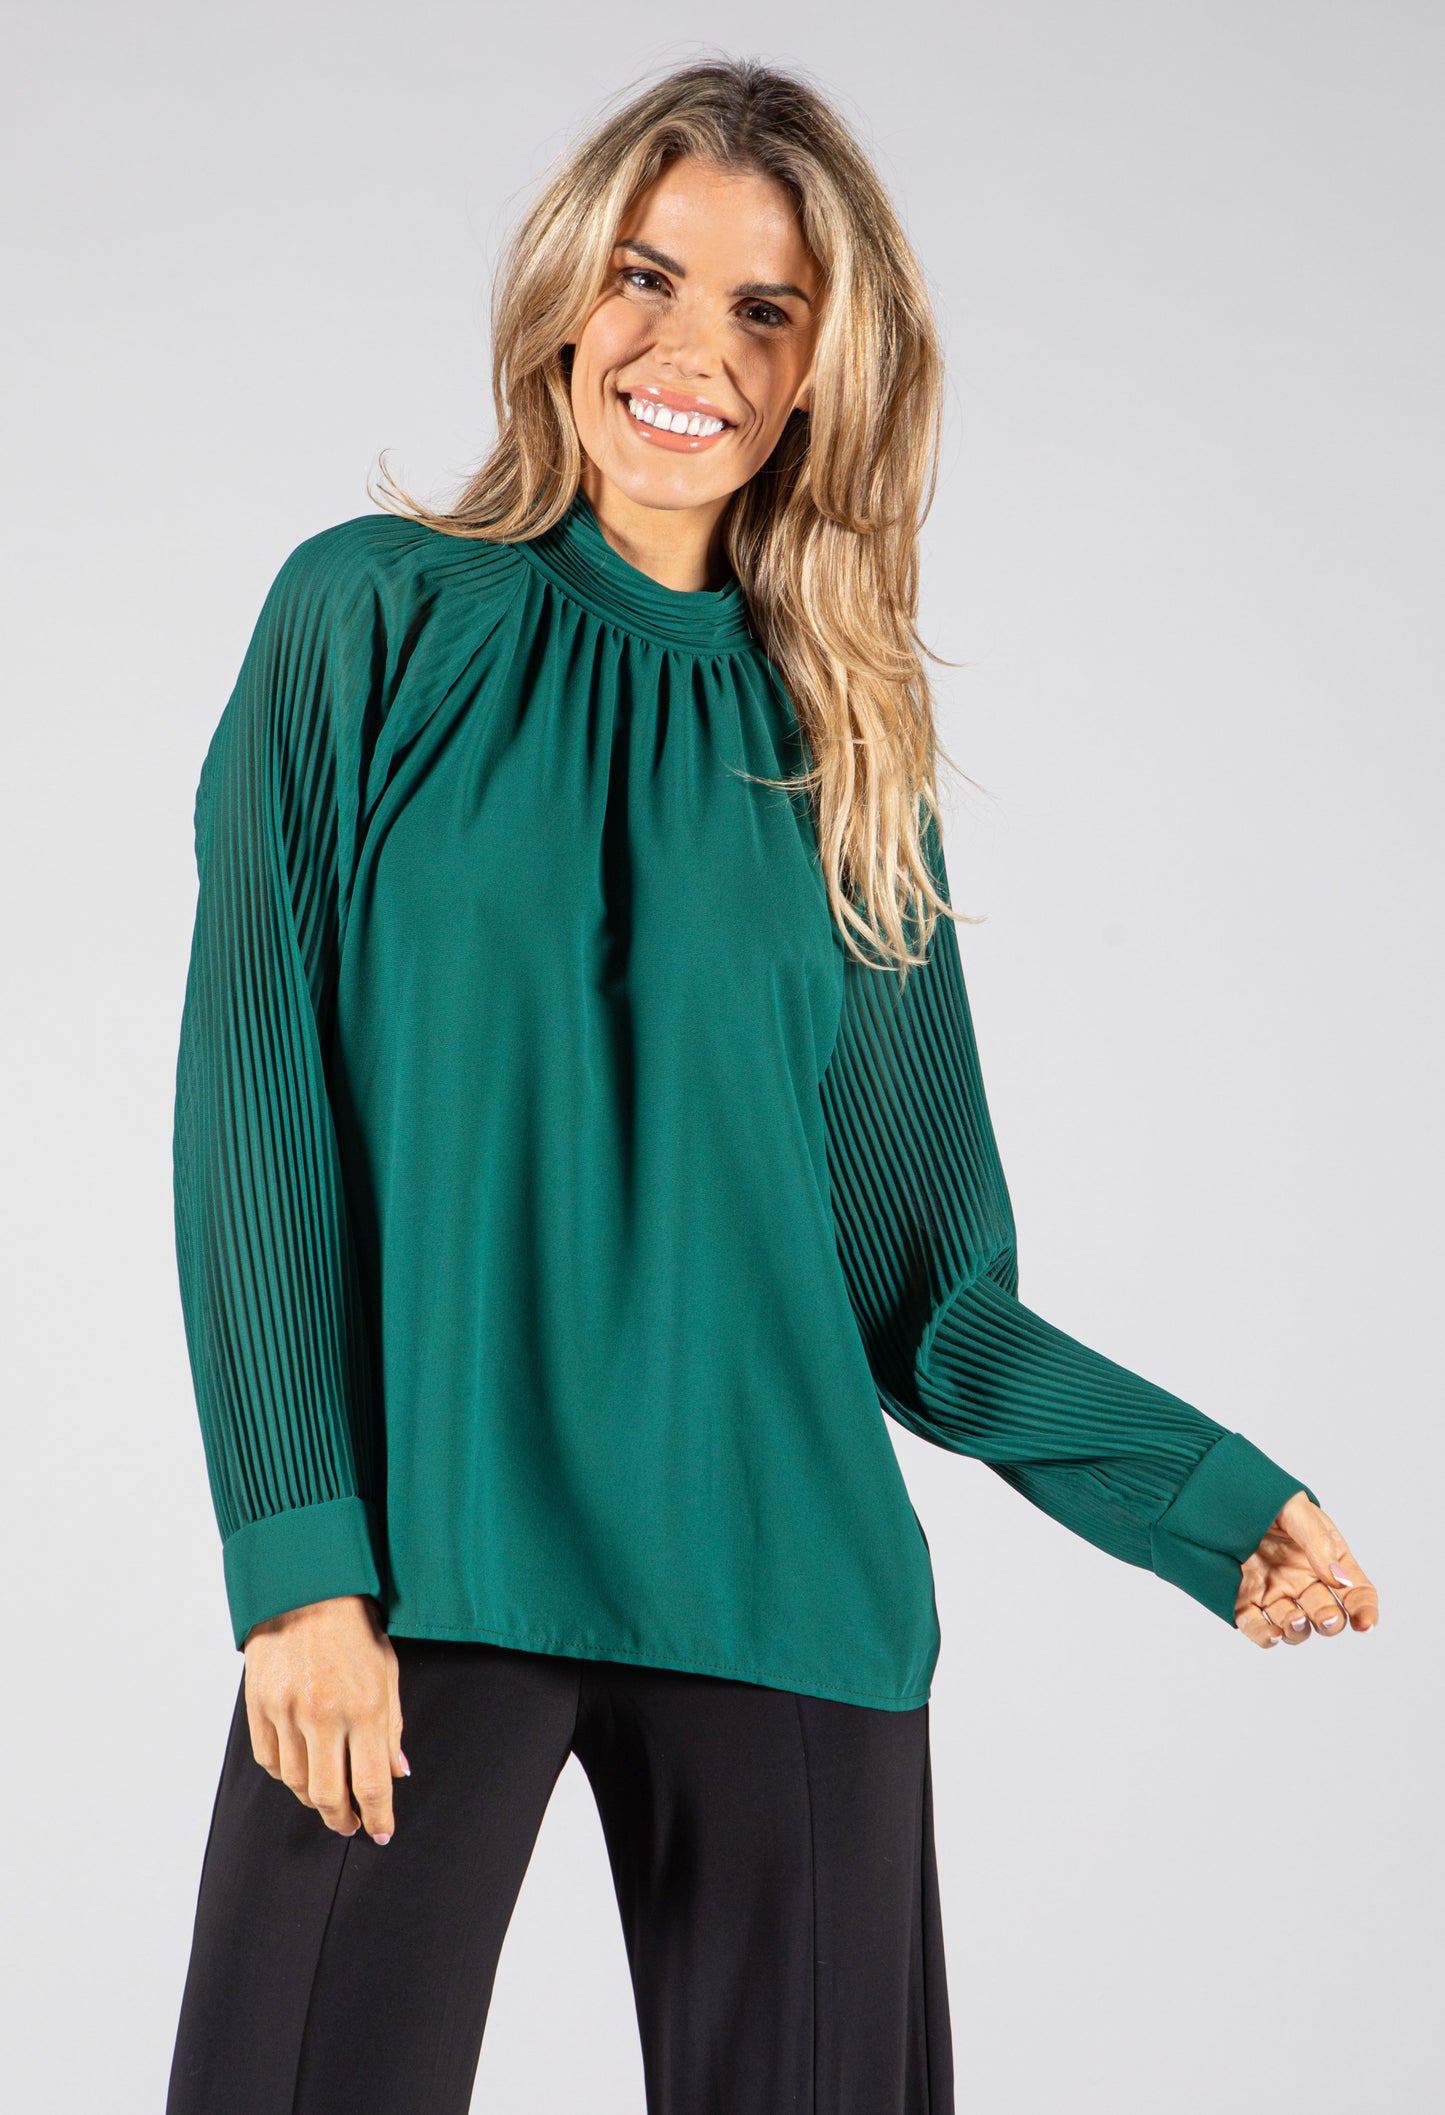 Pleated High Neck Blouse